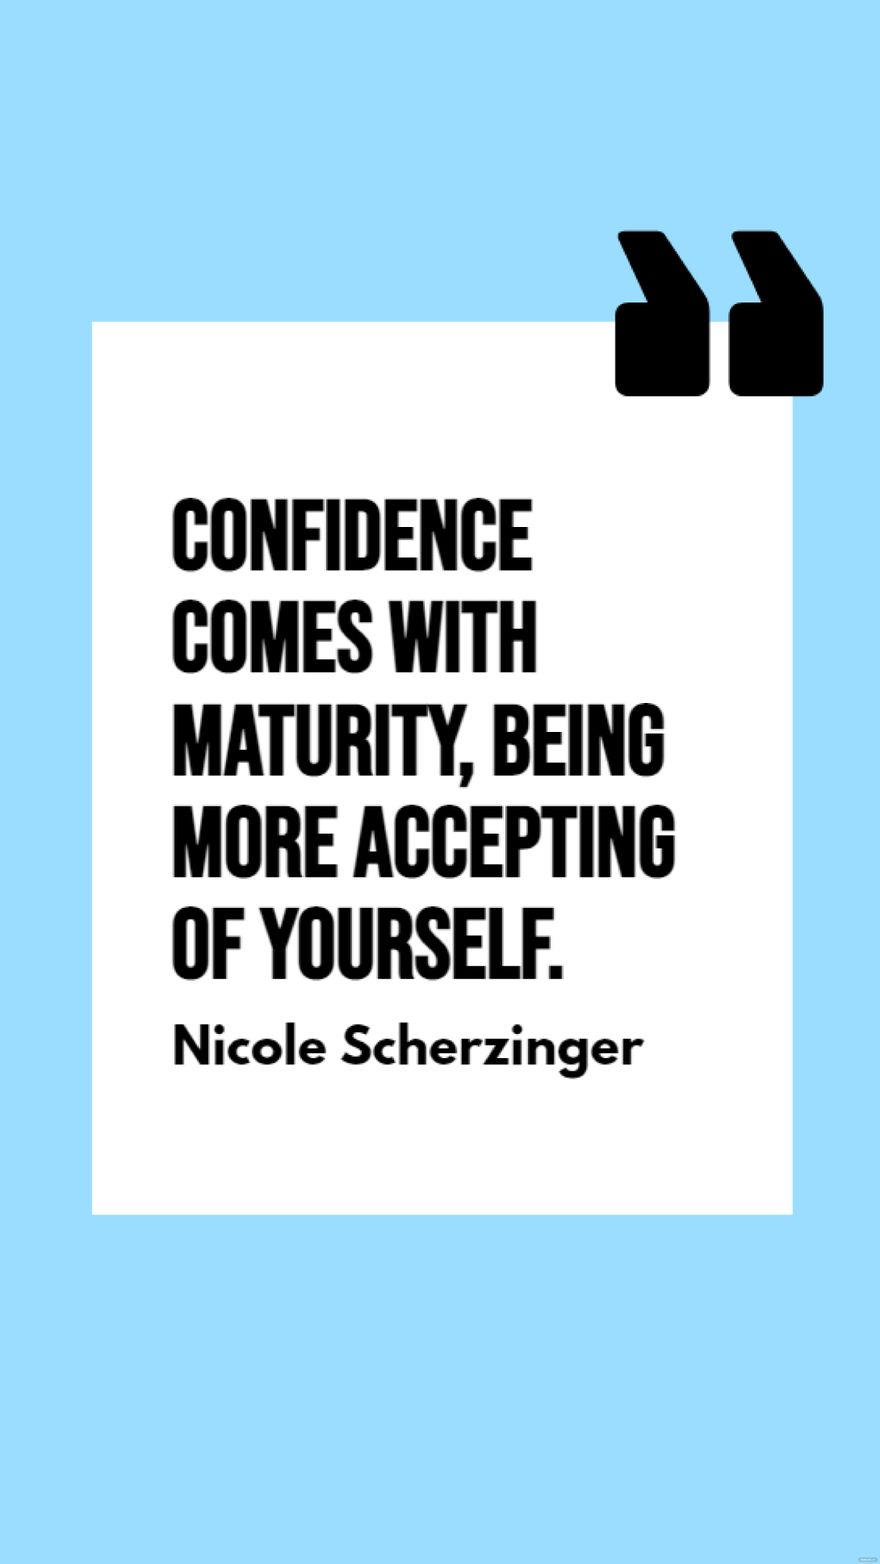 Nicole Scherzinger - Confidence comes with maturity, being more accepting of yourself. in JPG